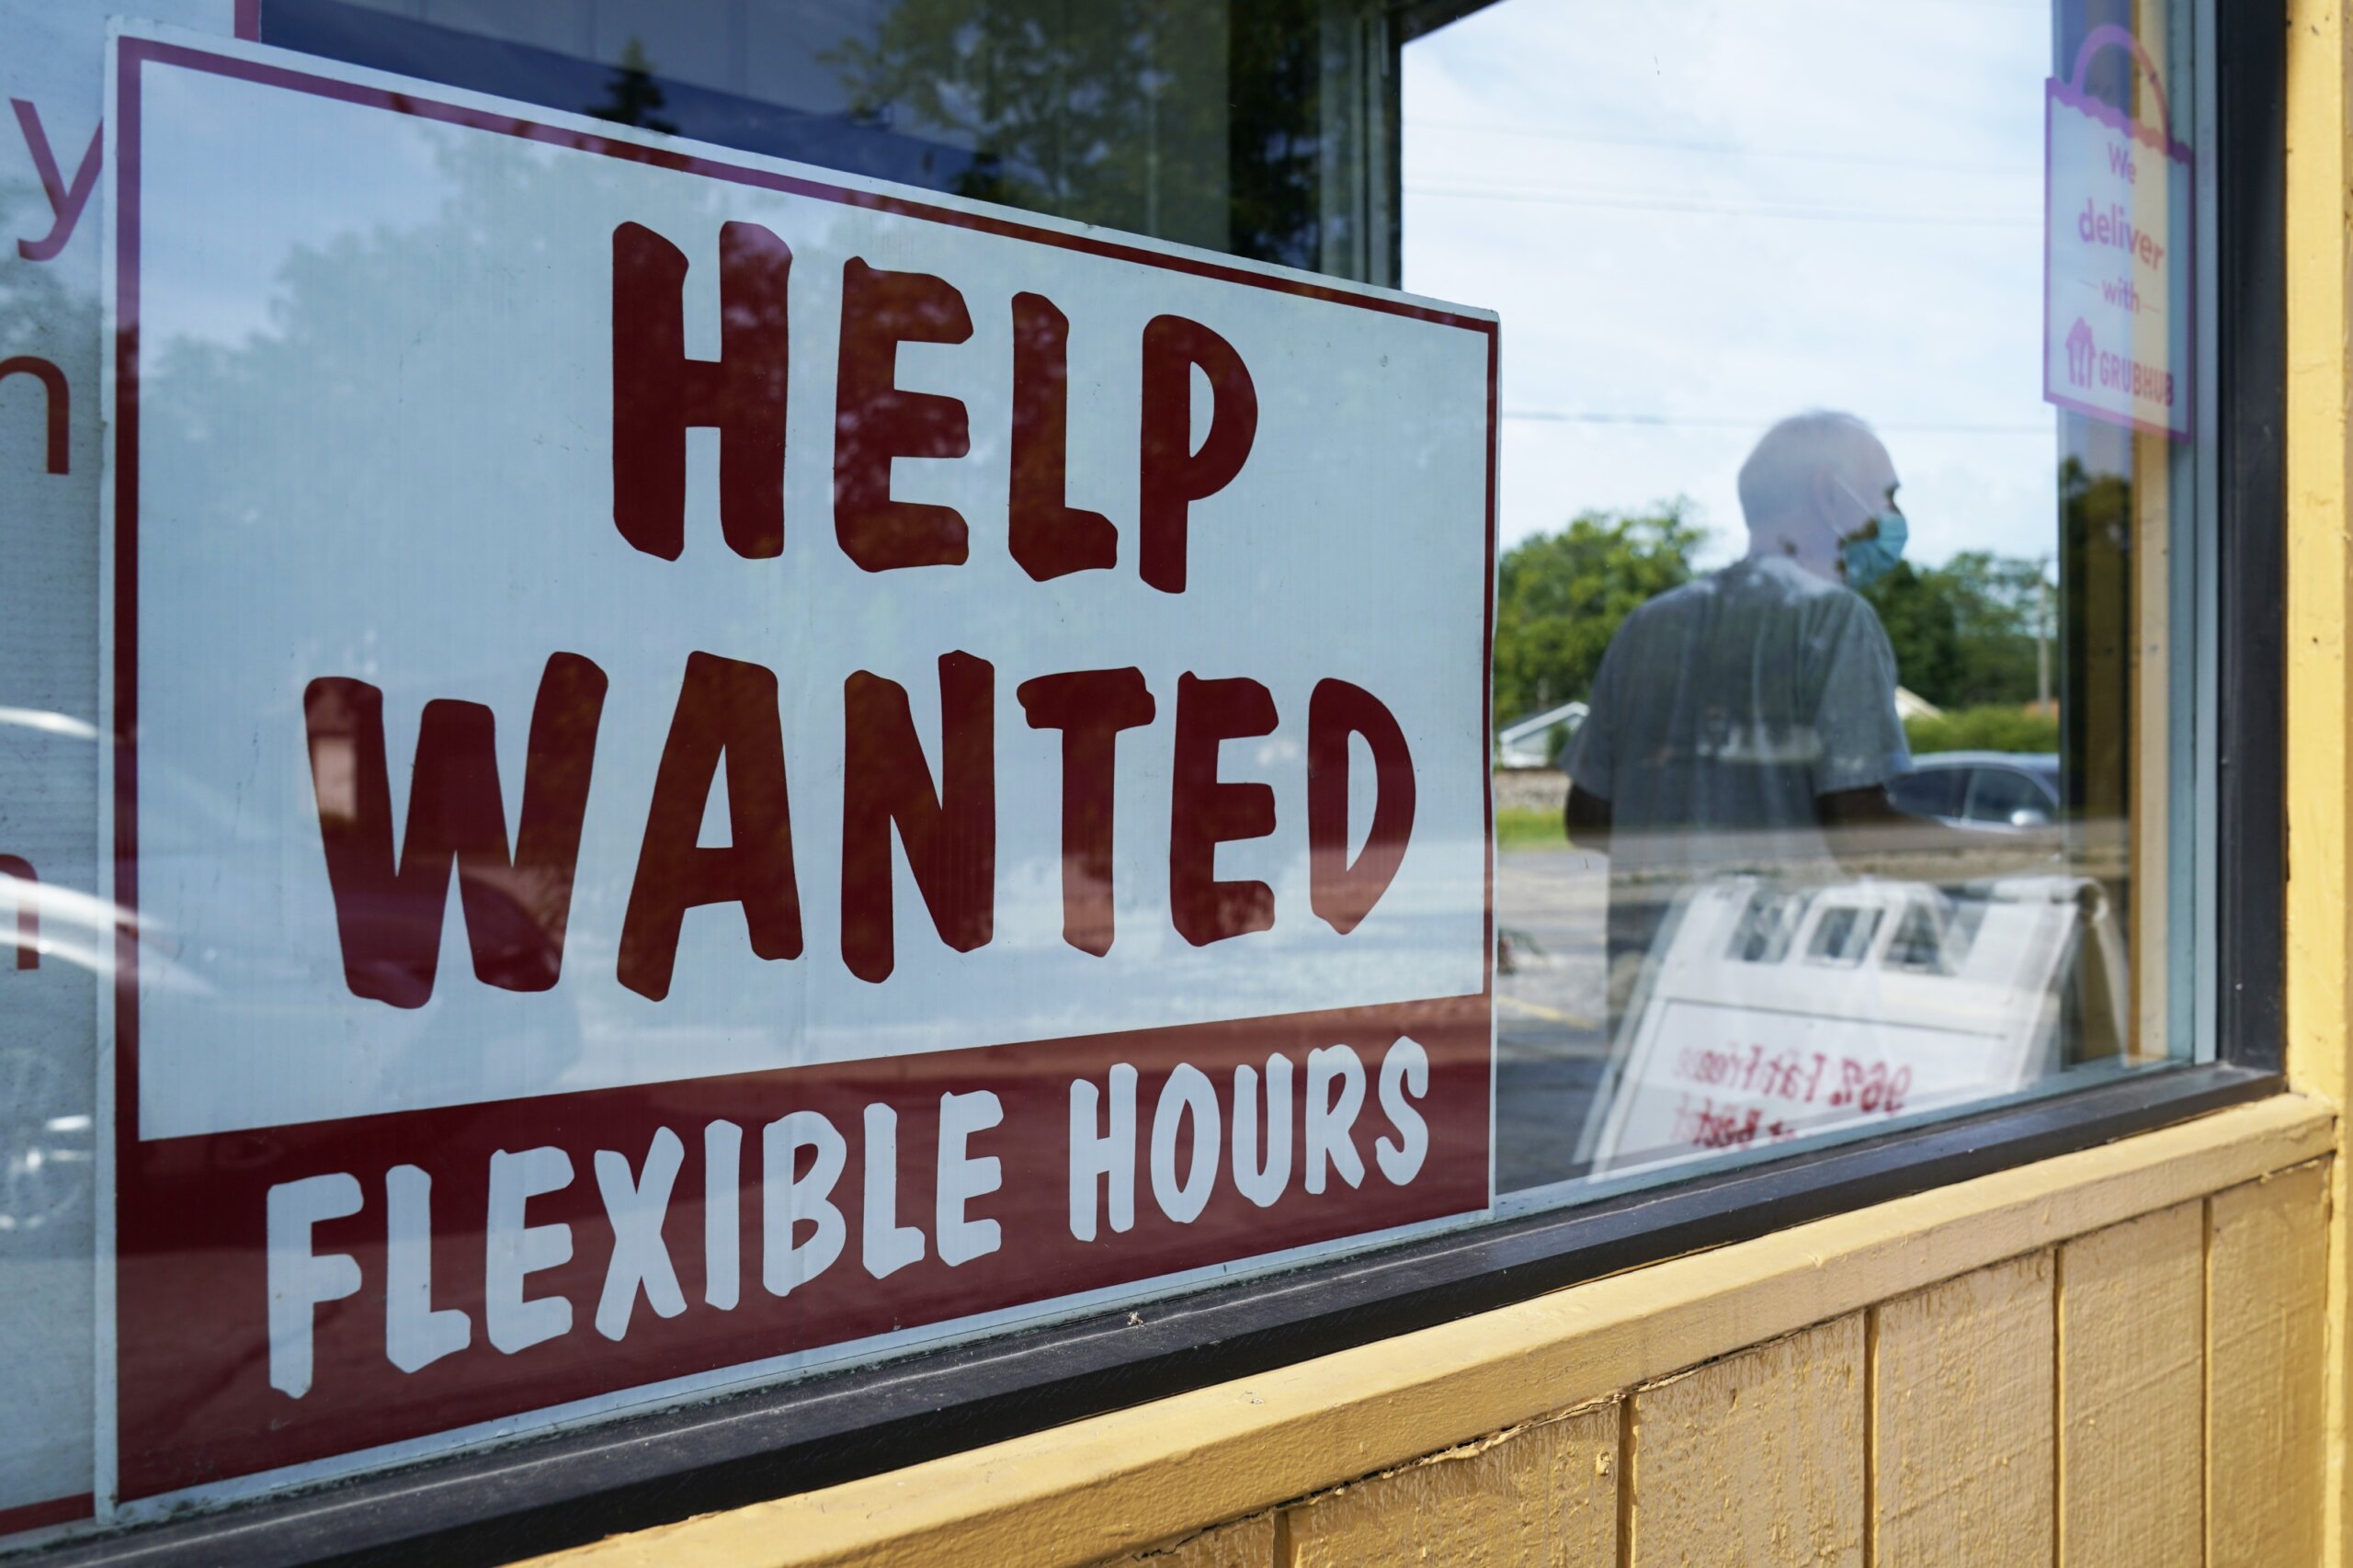 Maryland unemployment falls, Virginia jobless rate rises